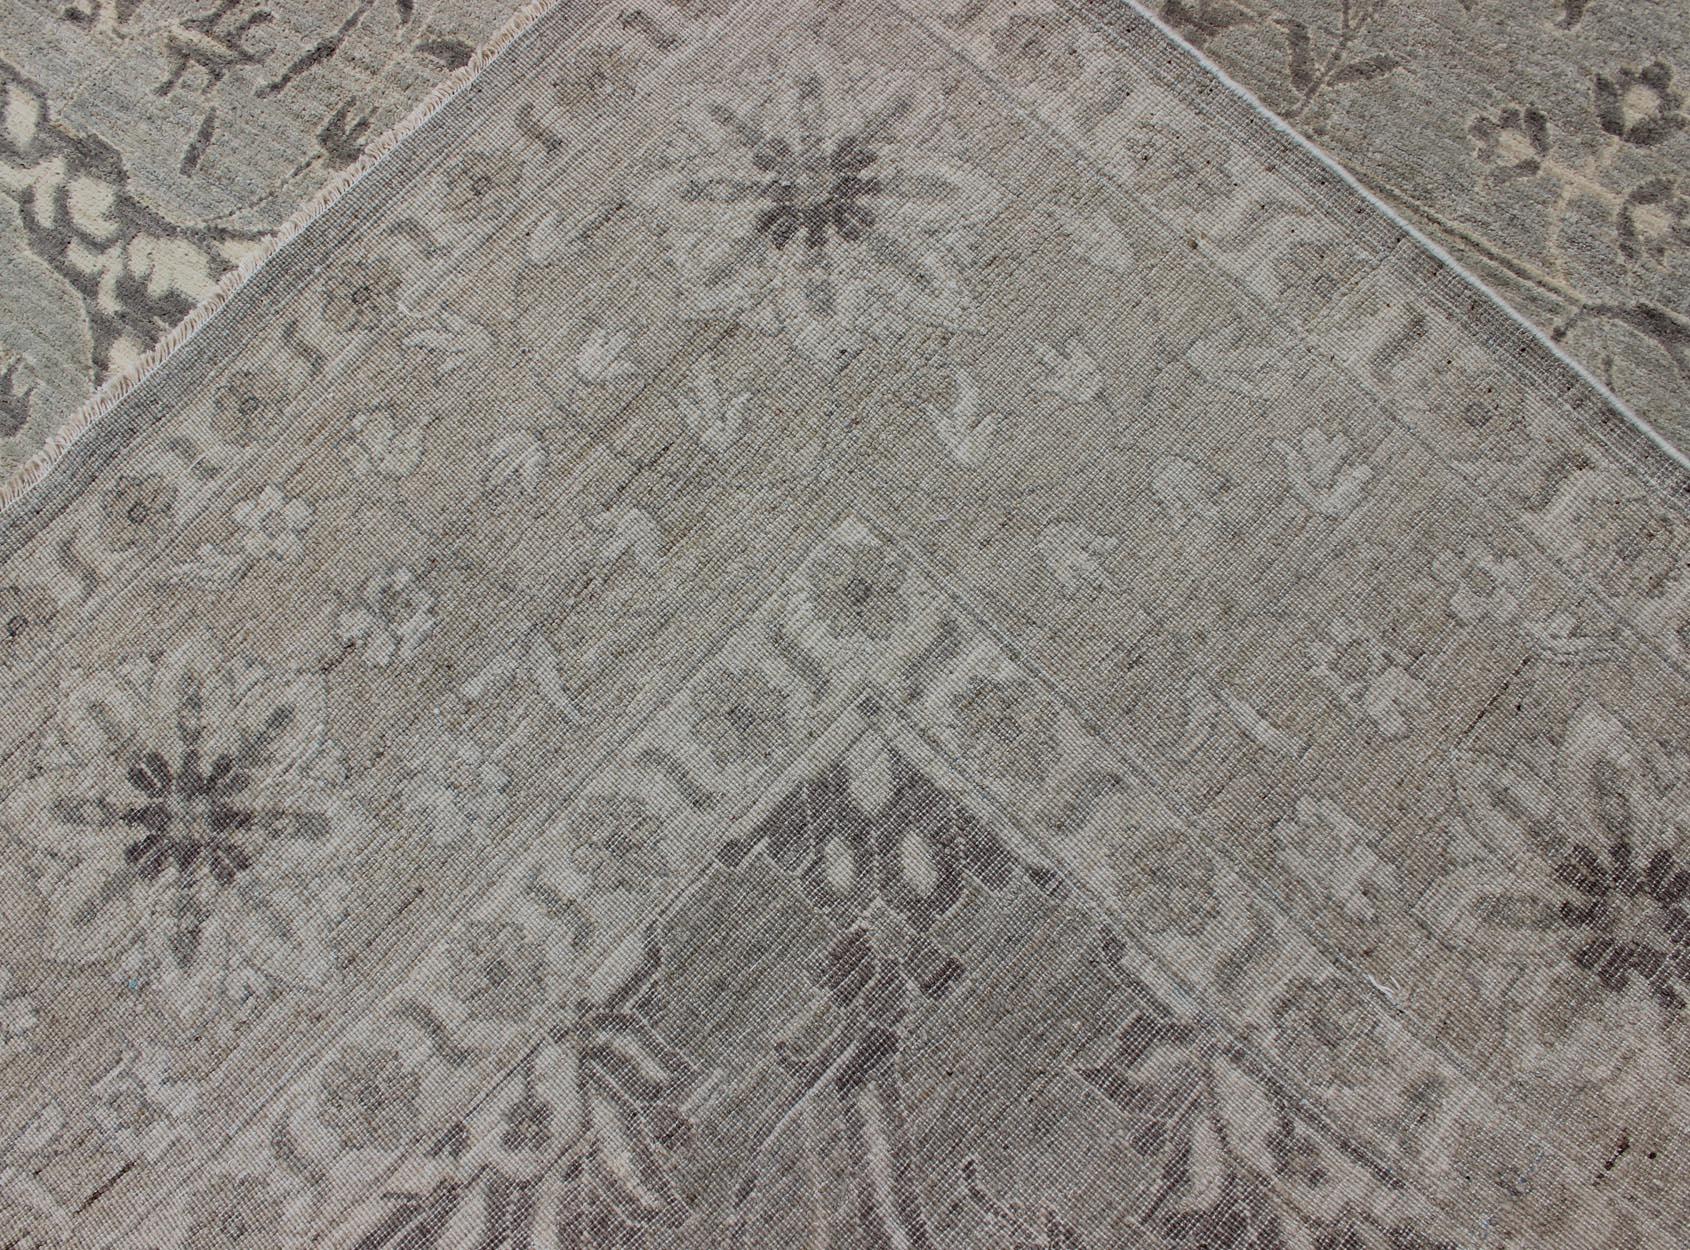 Charming Tabriz Design Rug with All-Over Design in Gray's, Tan, and Cream For Sale 4